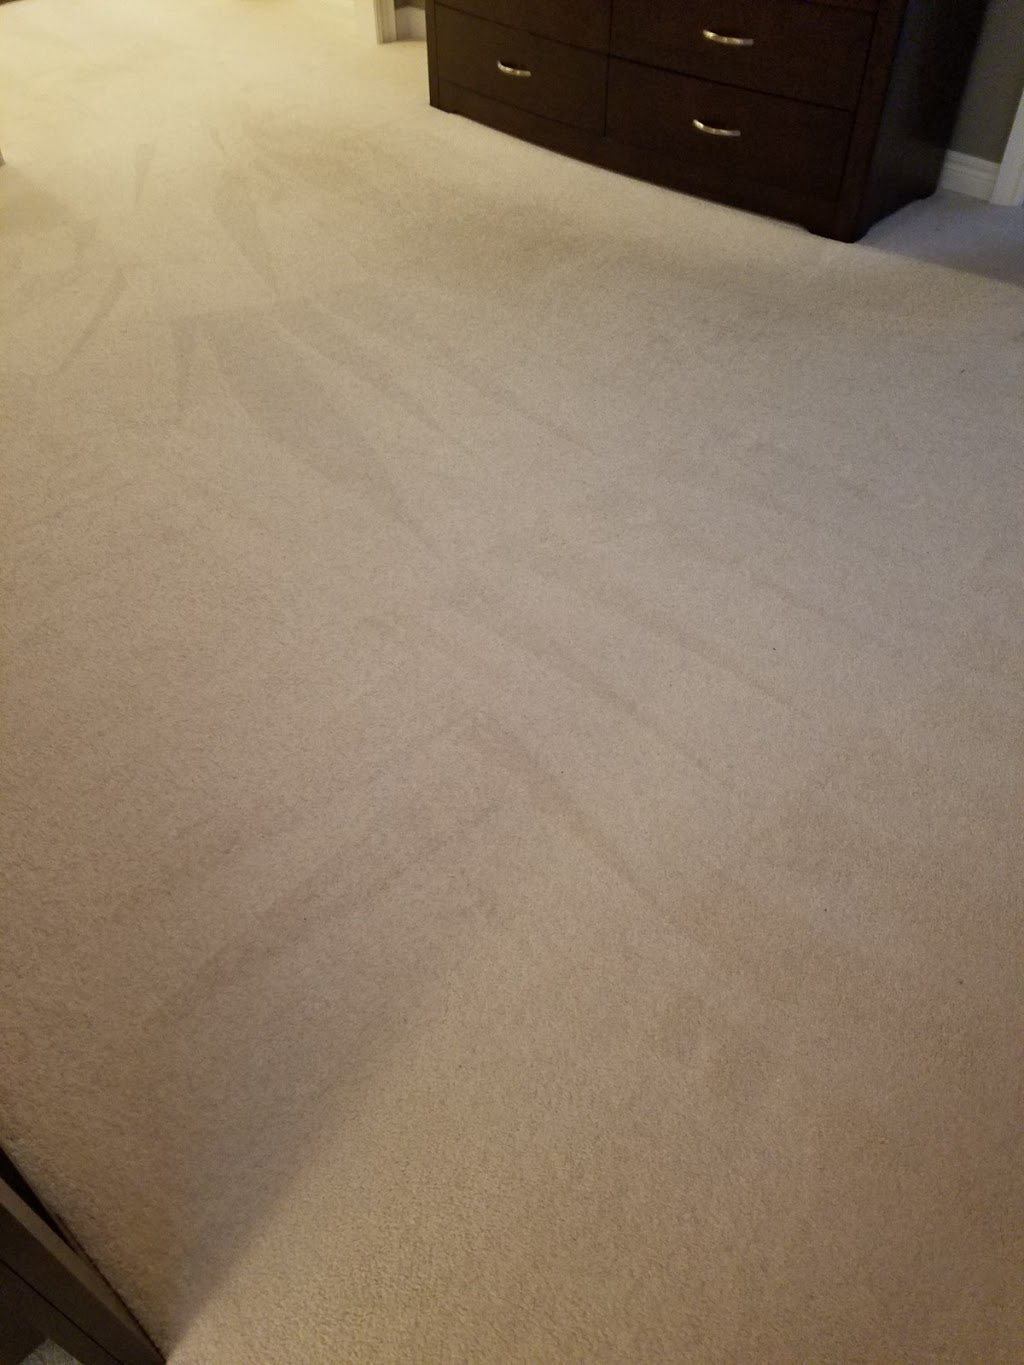 A to Z Carpet Cleaning | 7601 Bathurst St #405, Thornhill, ON L4J 4H5, Canada | Phone: (647) 224-8928